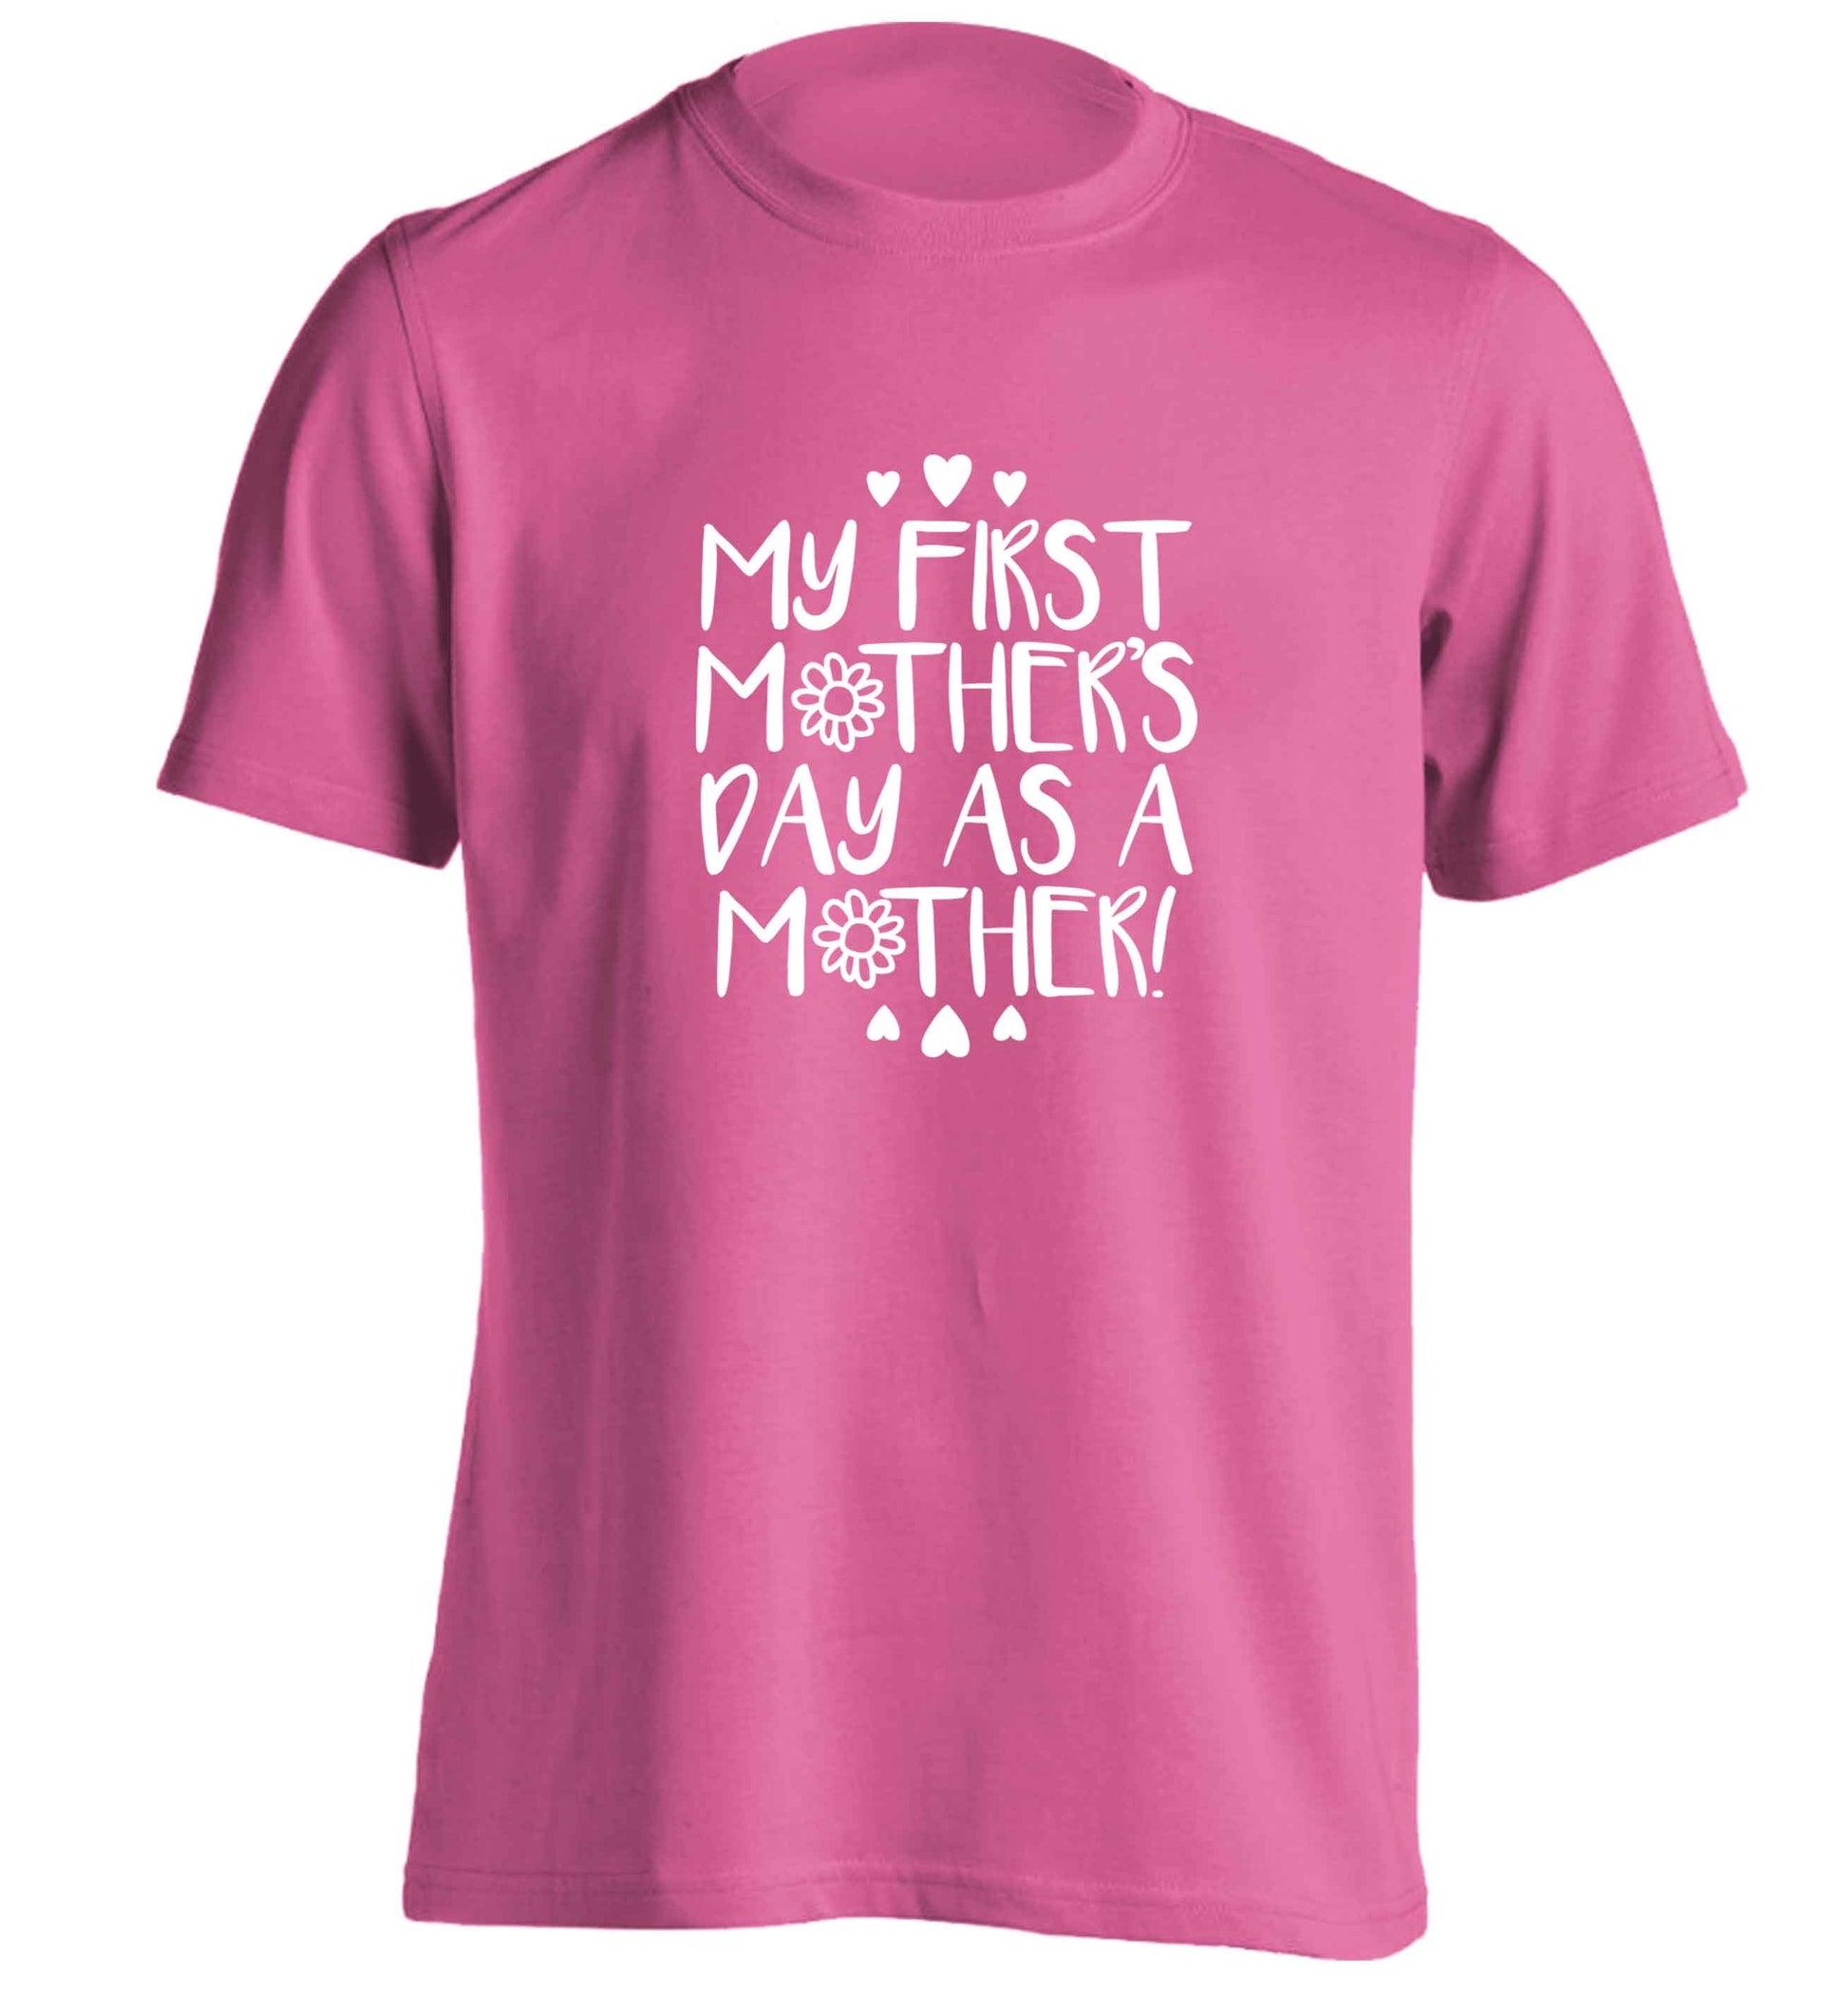 It's my first mother's day as a mother adults unisex pink Tshirt 2XL